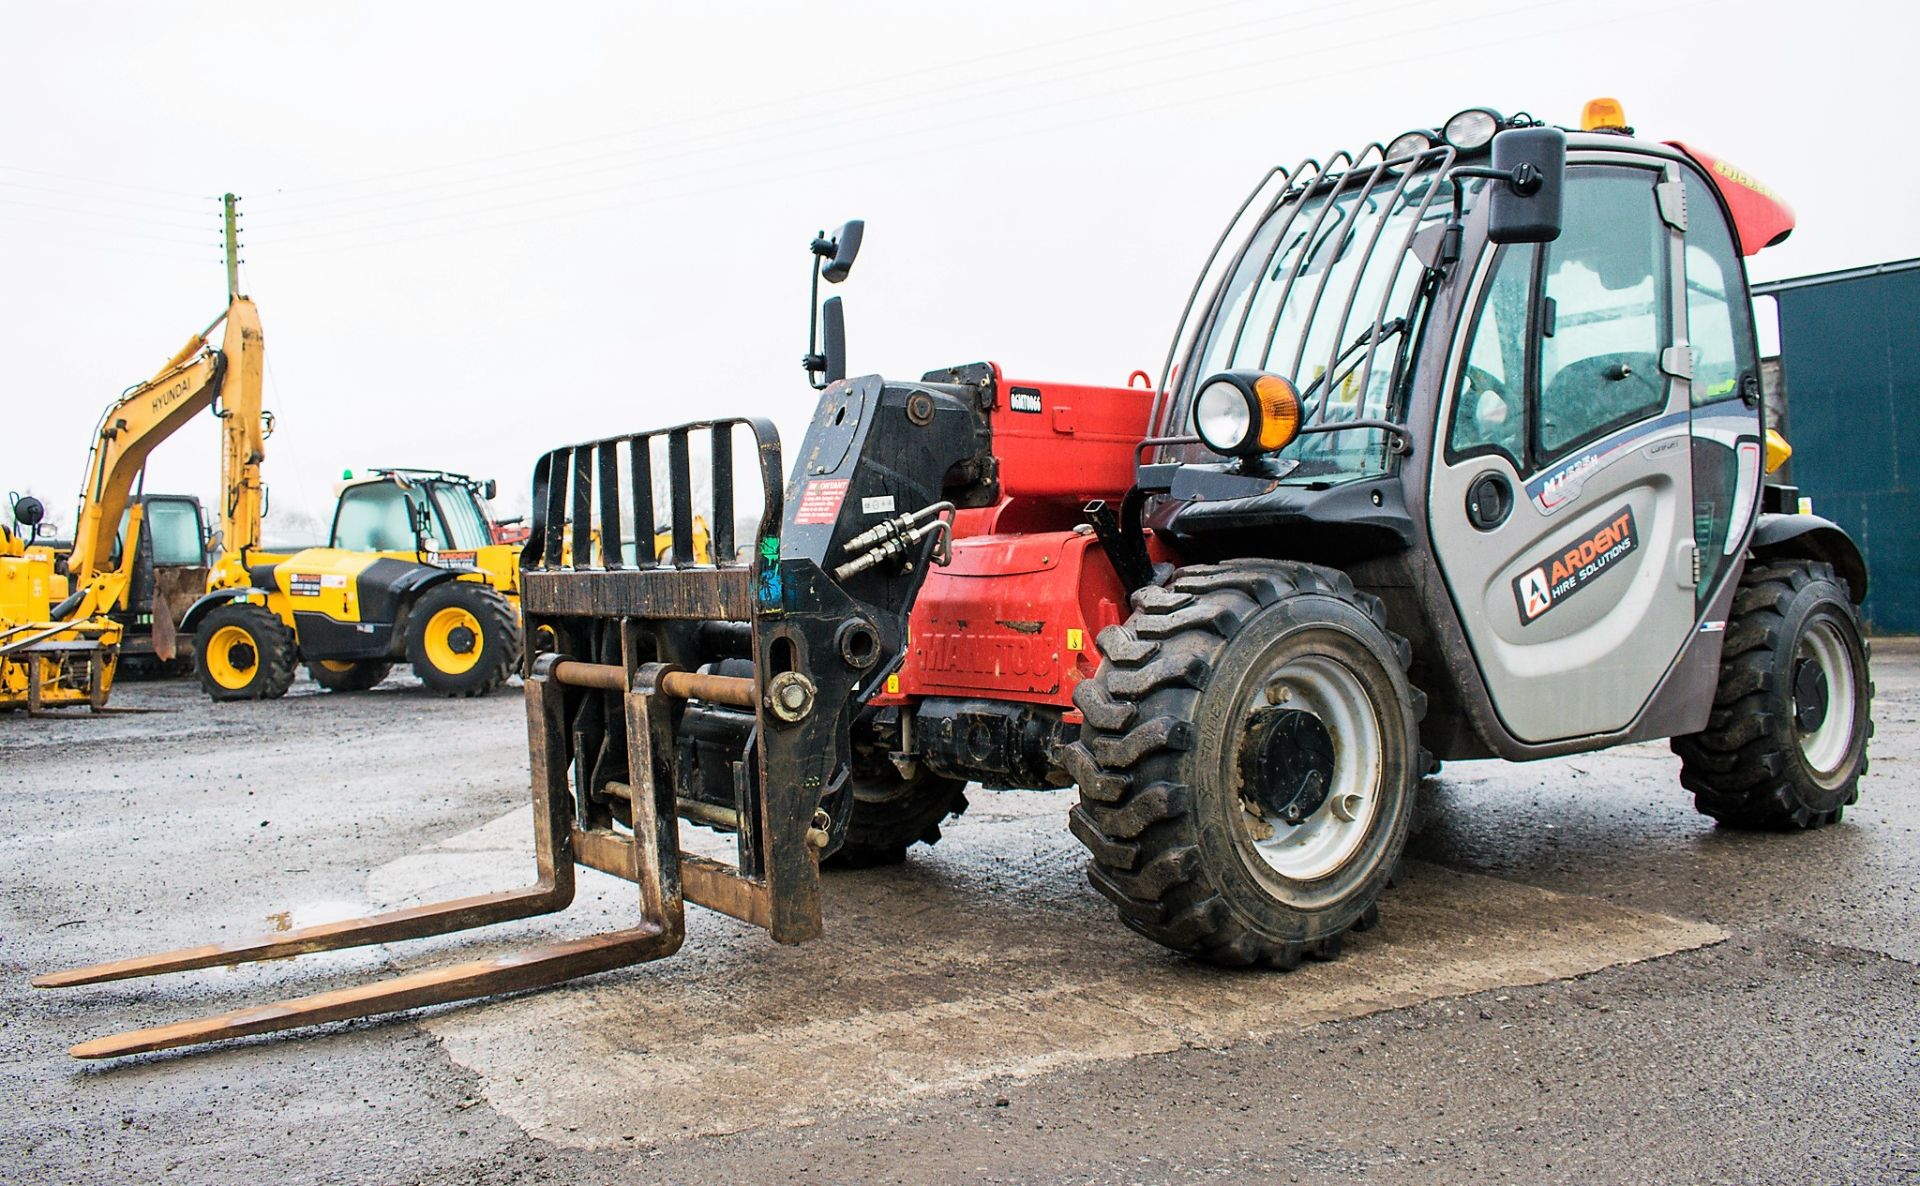 Manitou MT625H 6 metre telescopic handler Year: 2015 S/N: 951138 Recorded Hours: 3177 c/w turbo